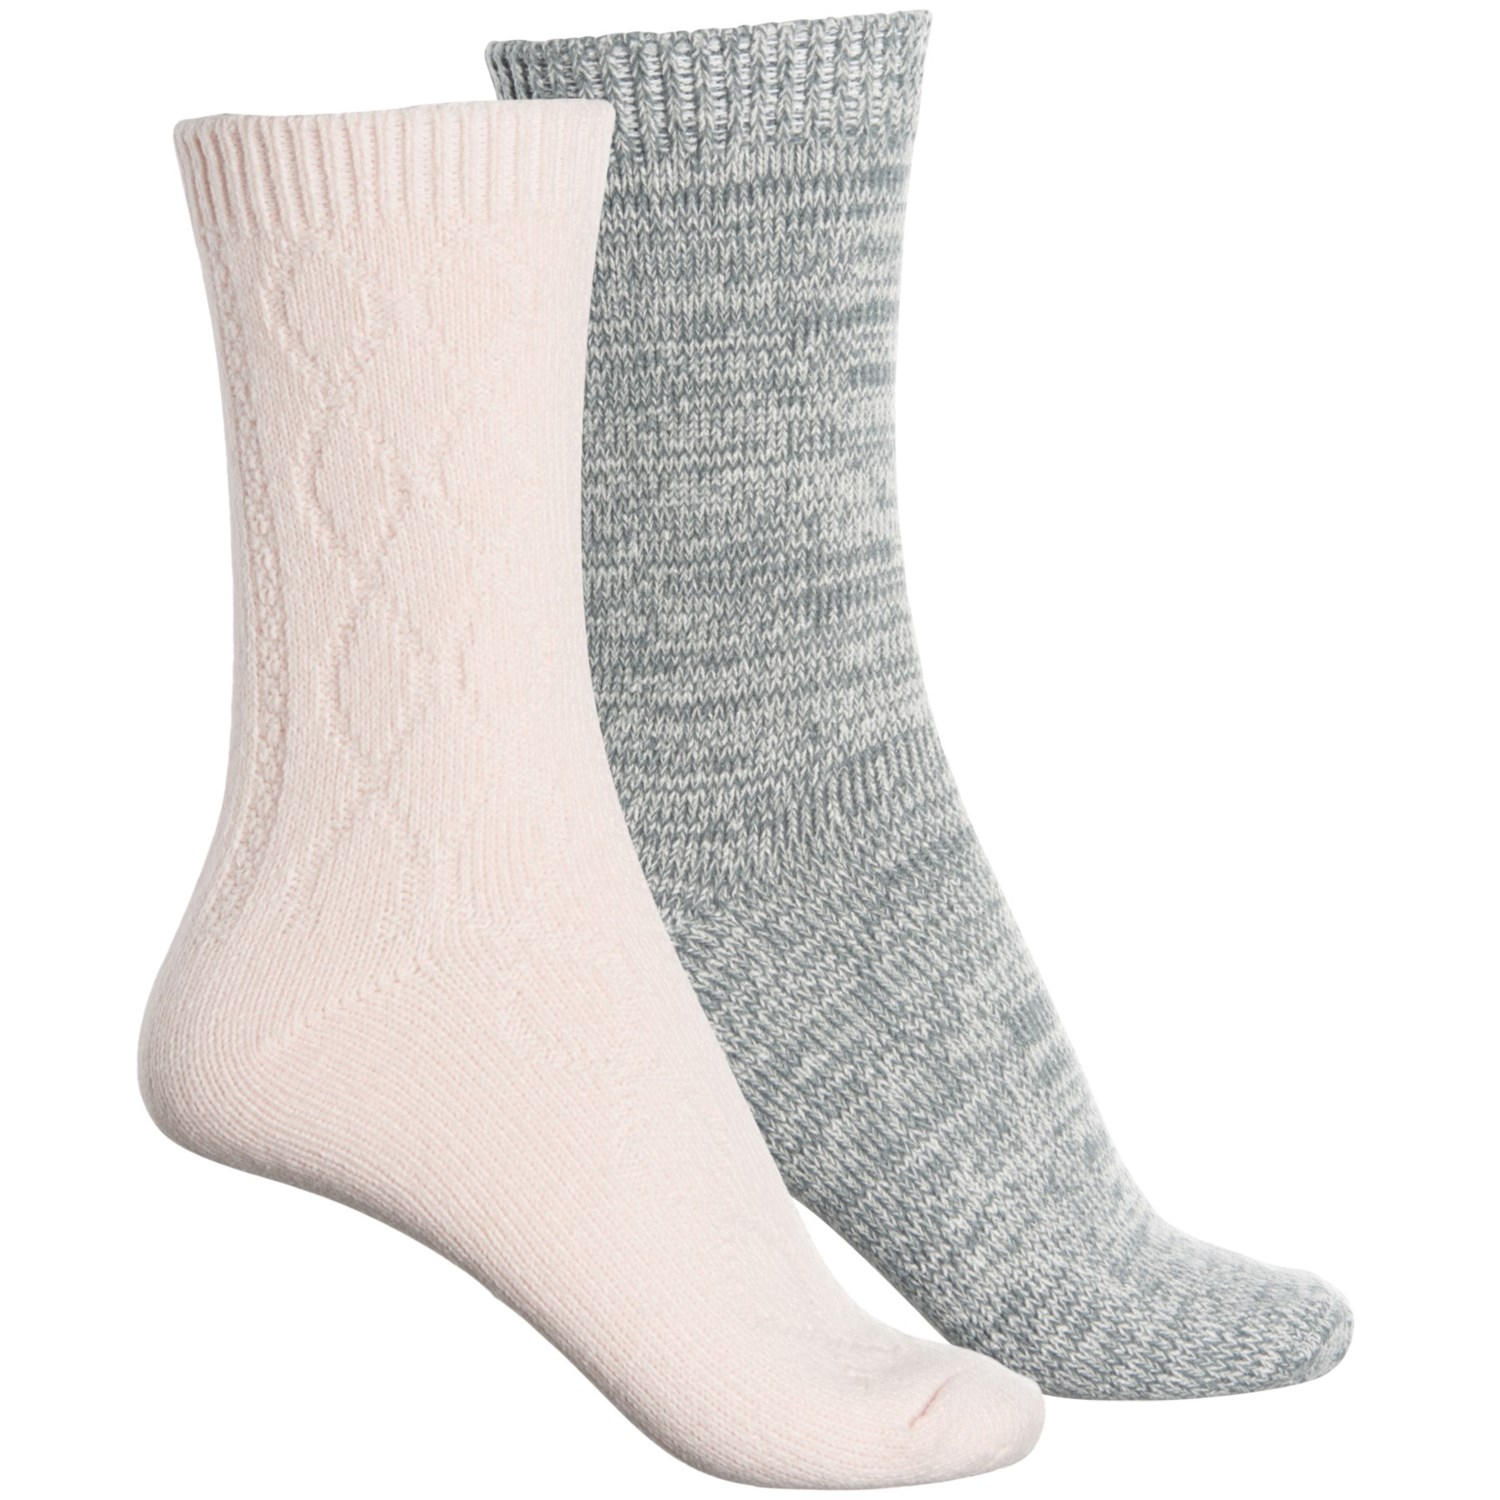 Born Cable Knit Boot Socks (For Women 